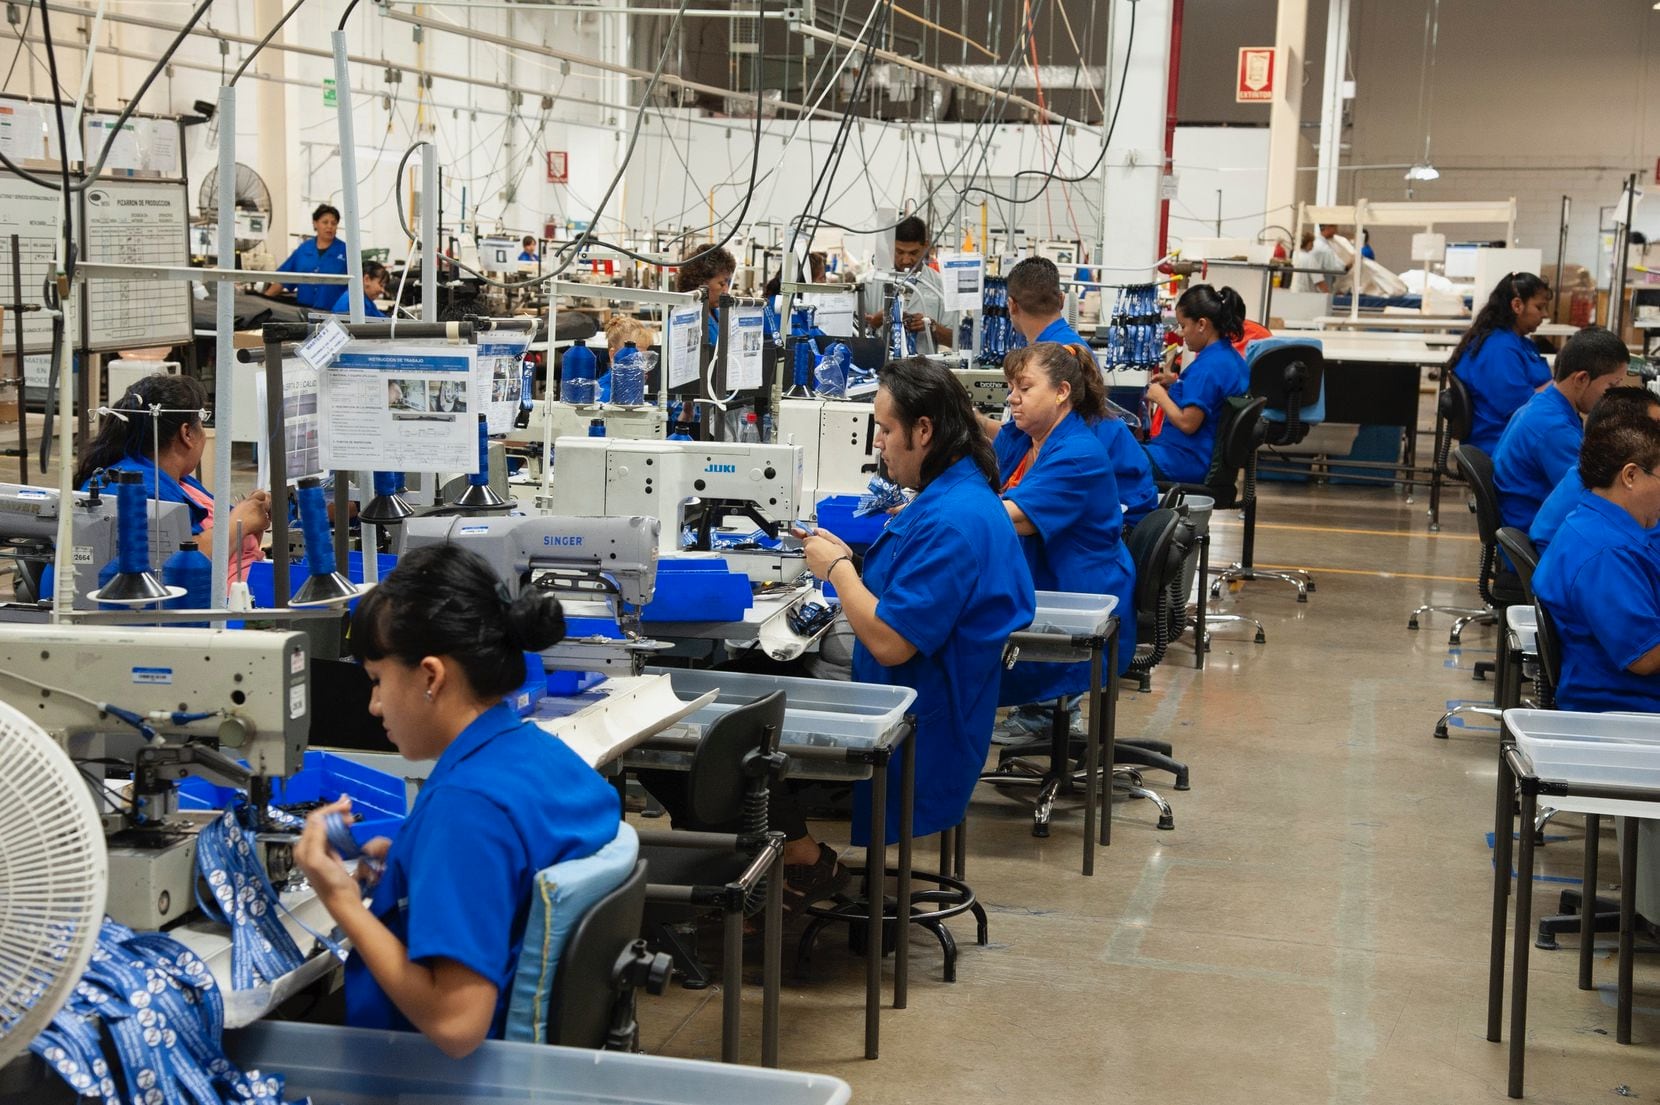 Workers inside an MFI International plant in Ciudad Juarez, Mexico, made fabrics in February...